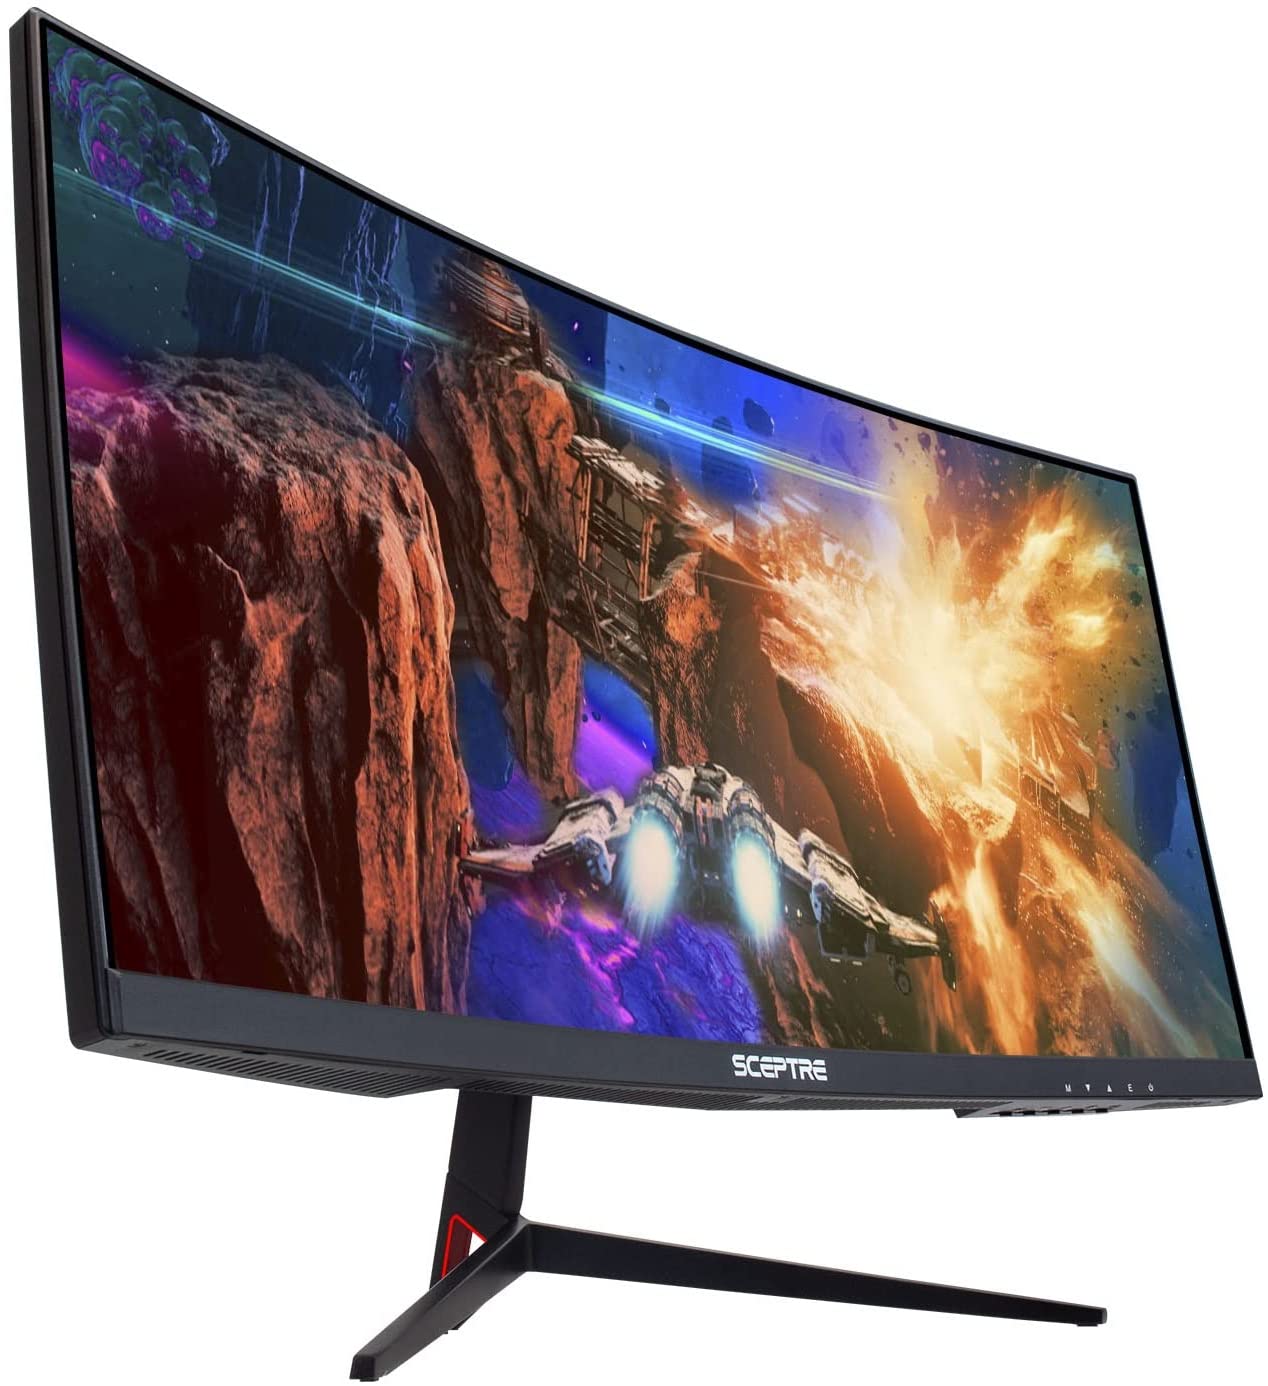 30" Sceptre 1080P Ultra Wide 200Hz Curved Gaming Monitor (C305B-200UN1) $241.19 + Free Shipping